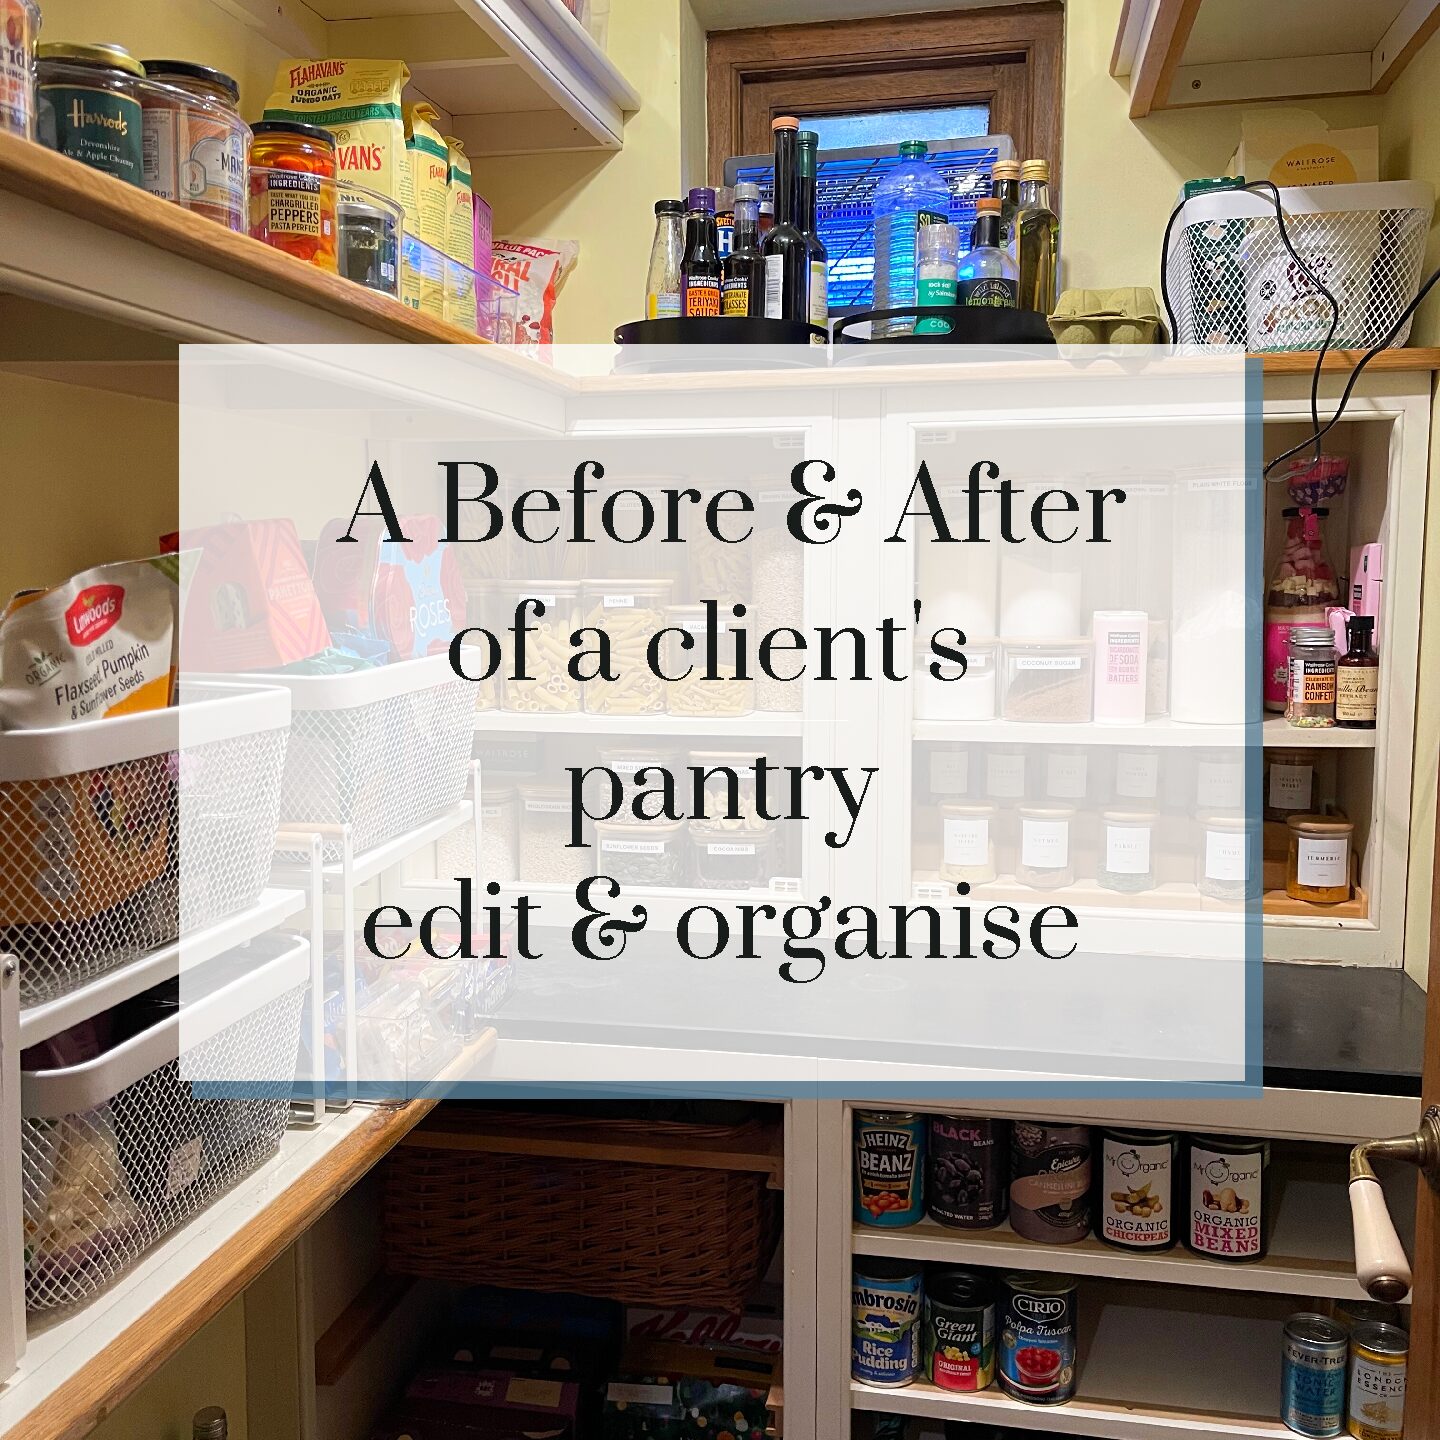 A Before & After of a pantry edit & organise